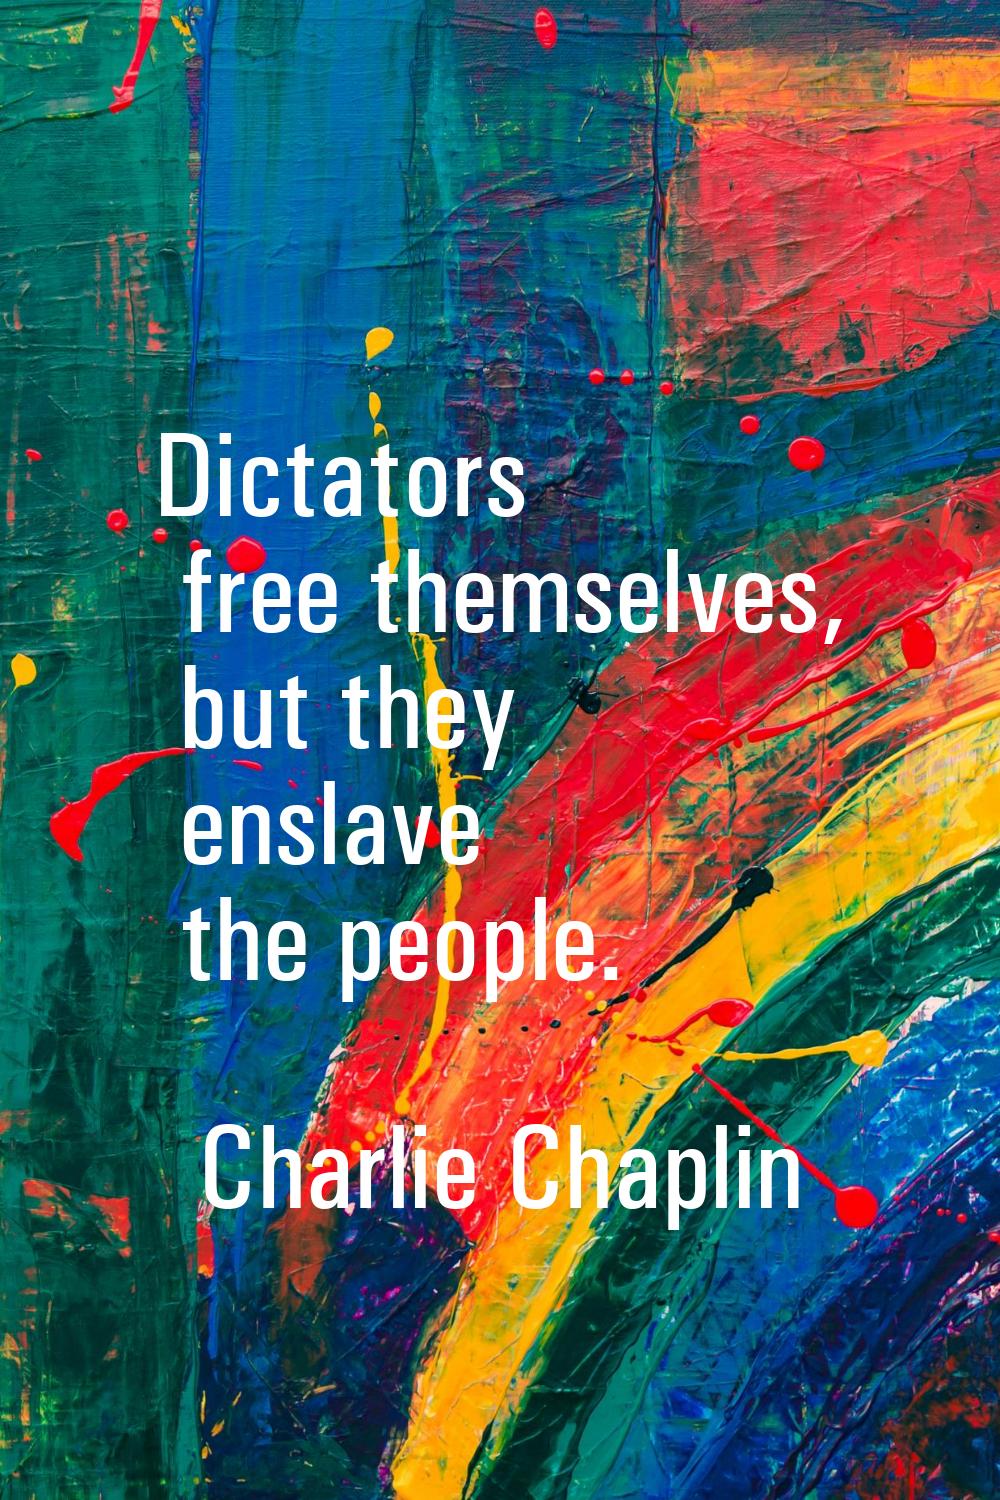 Dictators free themselves, but they enslave the people.